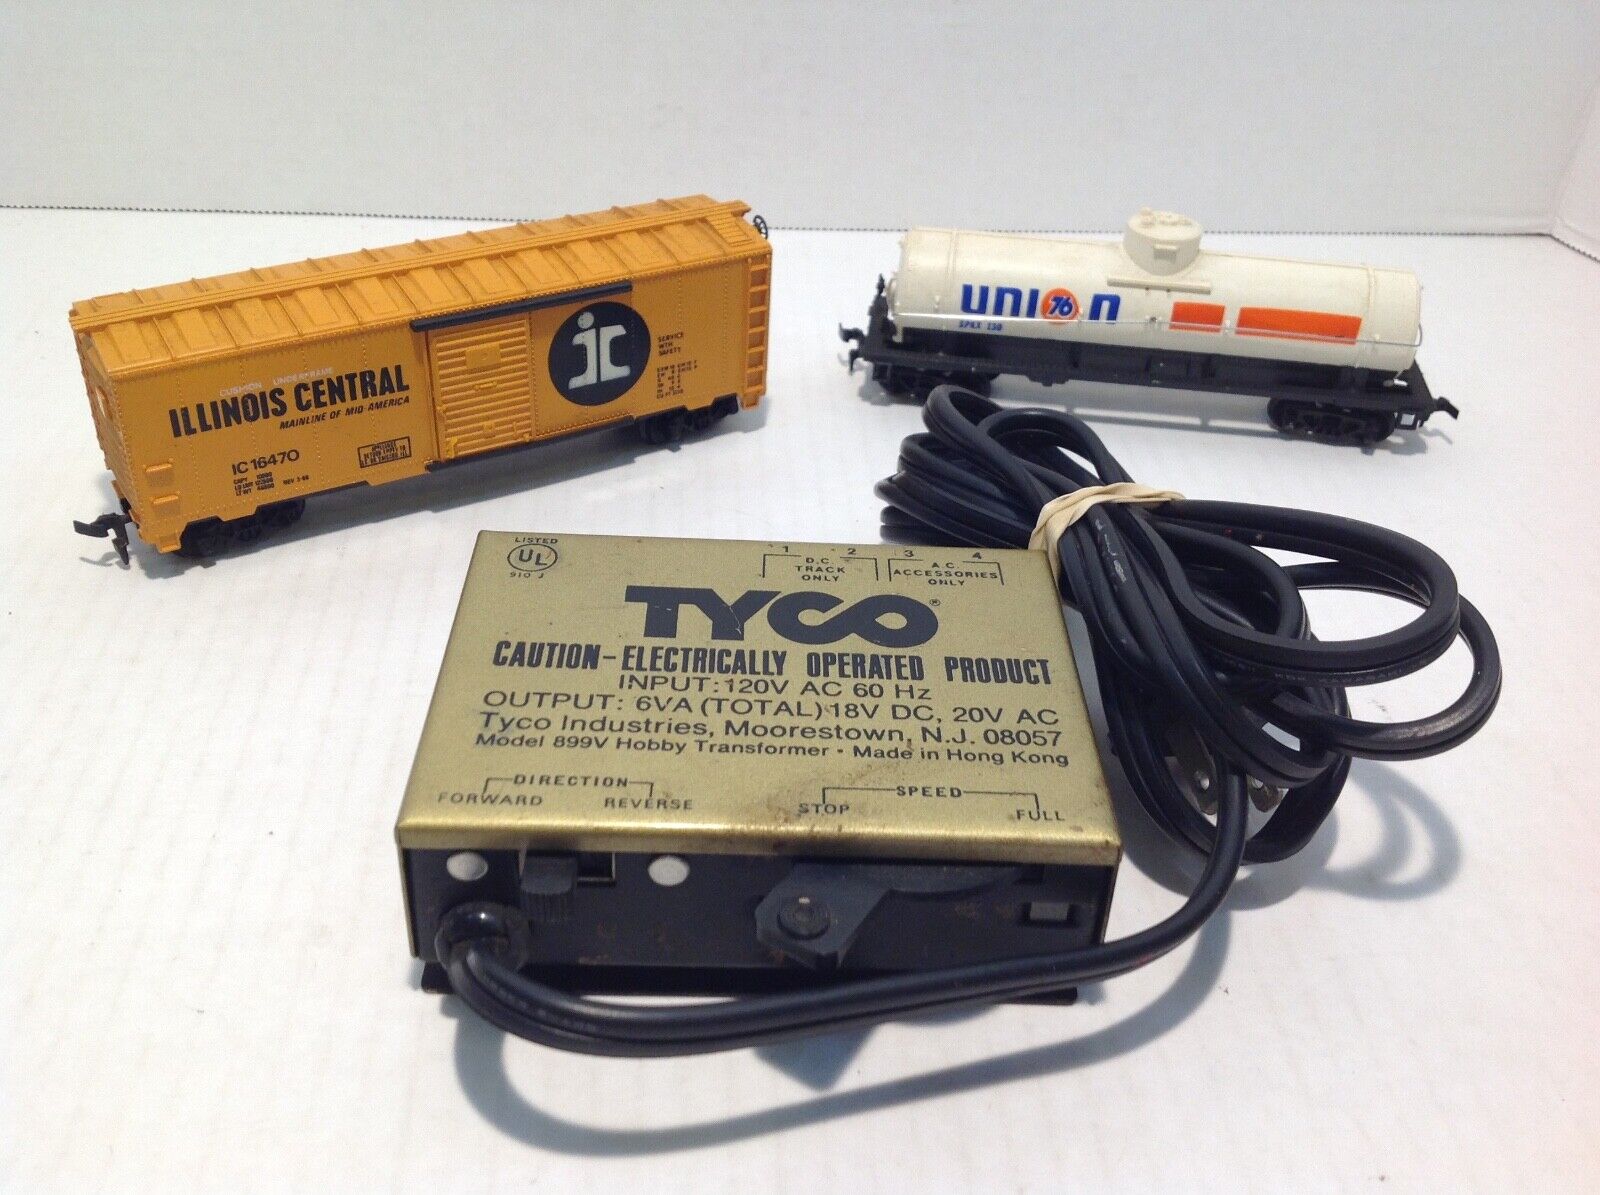 Vintage Outlet sale feature Tyco HO Scale Model Hobby Railroad Train Super popular specialty store Pow Transformer